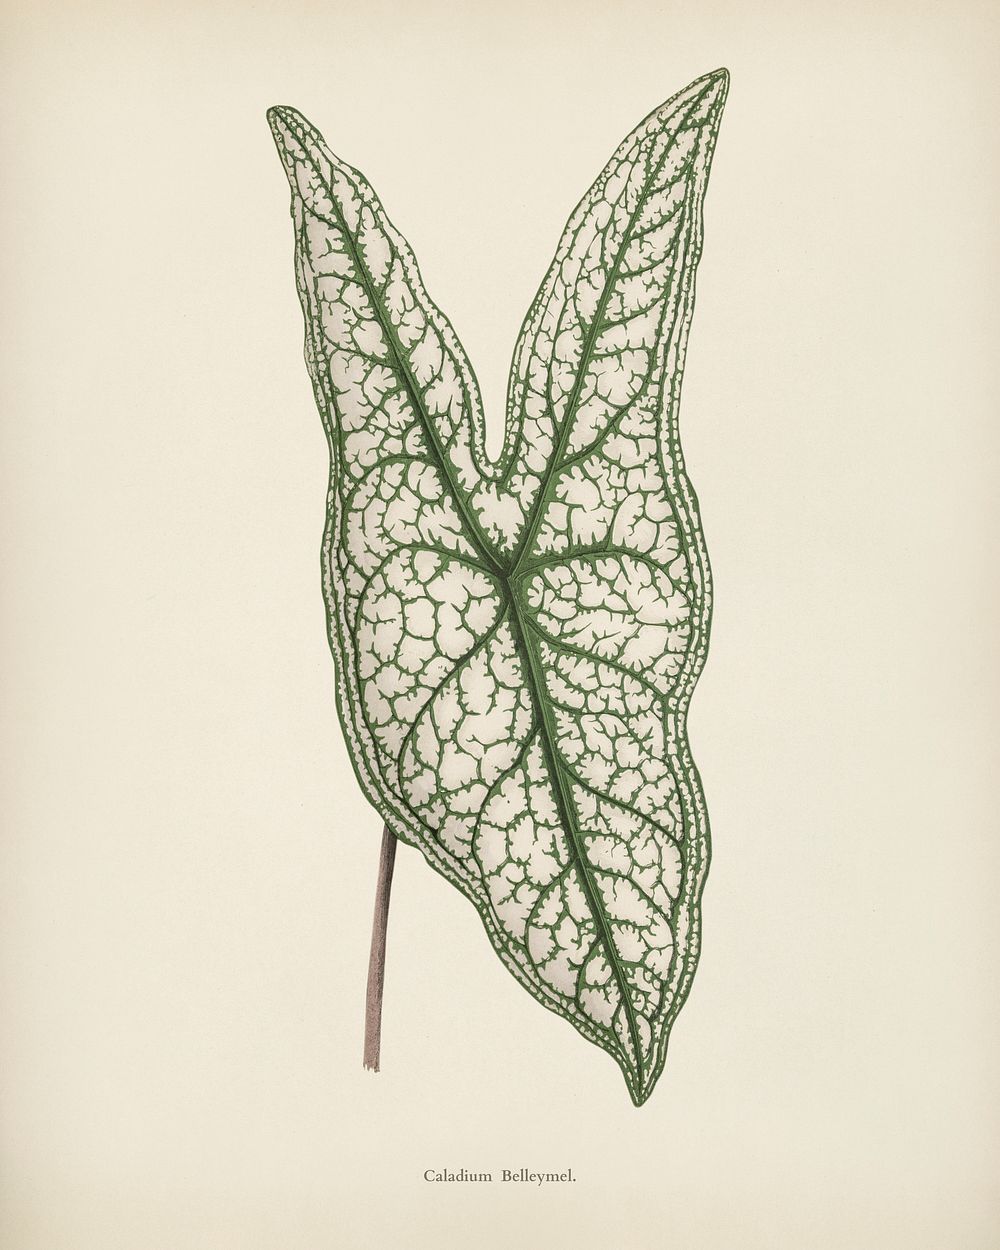 Heart of Jesus (Caladium Belleymel) engraved by Benjamin Fawcett (1808-1893) for Shirley Hibberd&rsquo;s (1825-1890) New and…